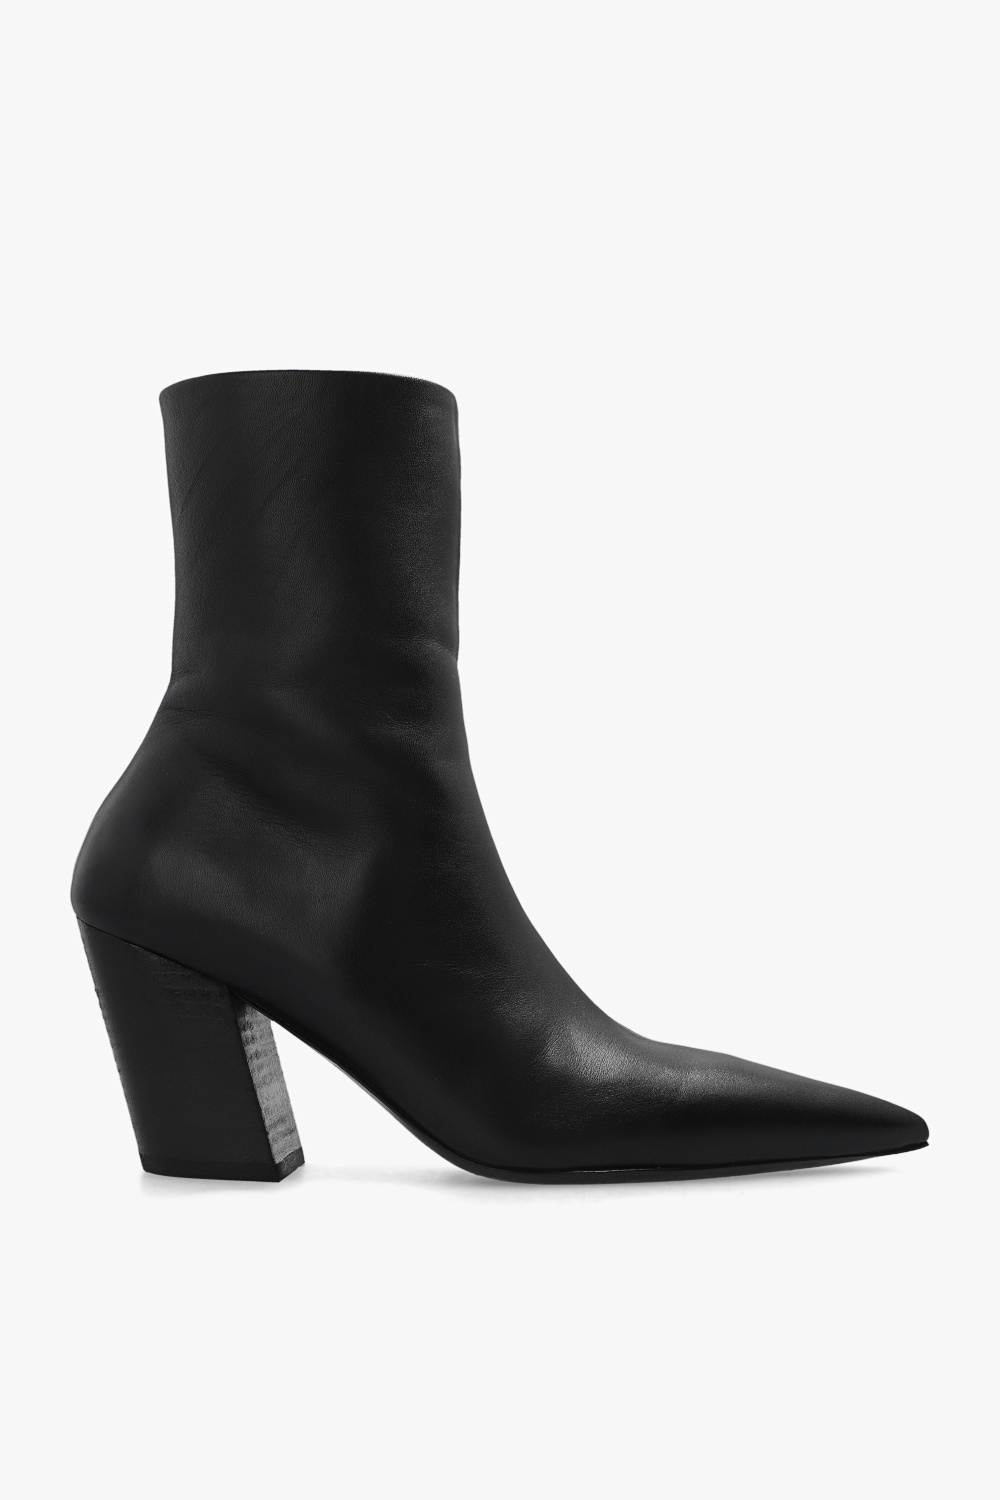 Marsell ‘Aghetto’ heeled ankle boots | Women's Shoes | Vitkac